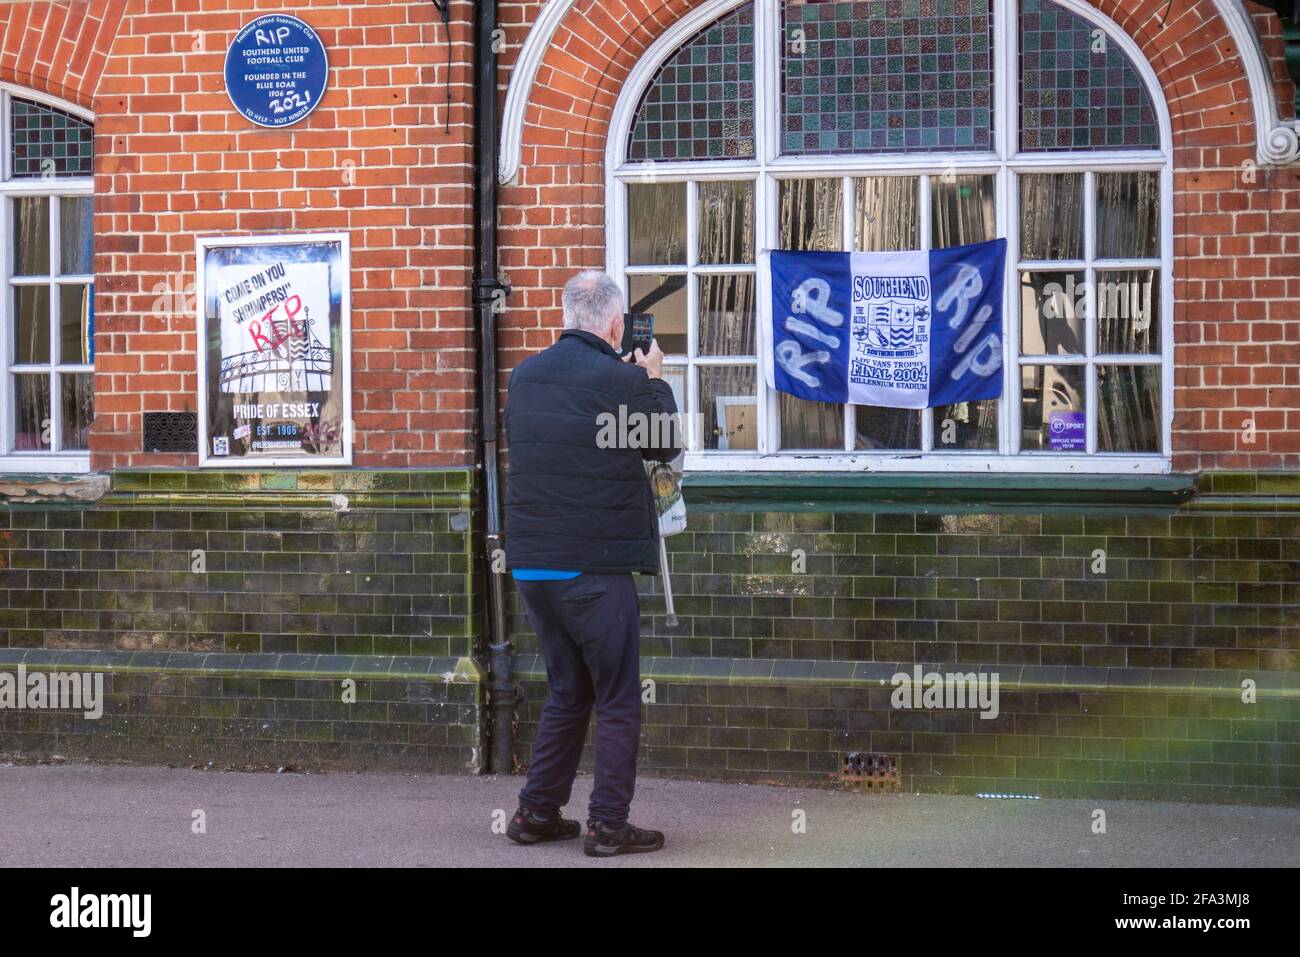 Protest graffiti outside the Blue Boar pub against Ron Martin chairman of Southend Utd football who are facing relegation Stock Photo